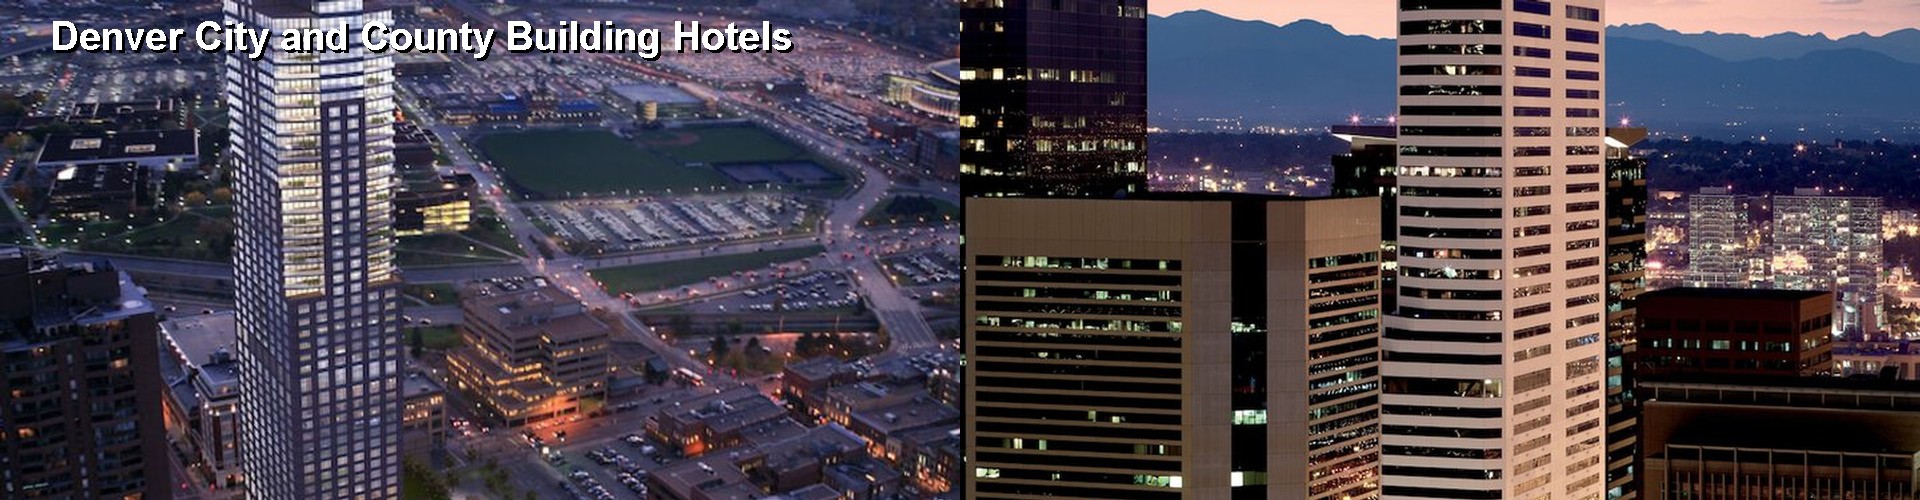 5 Best Hotels near Denver City and County Building